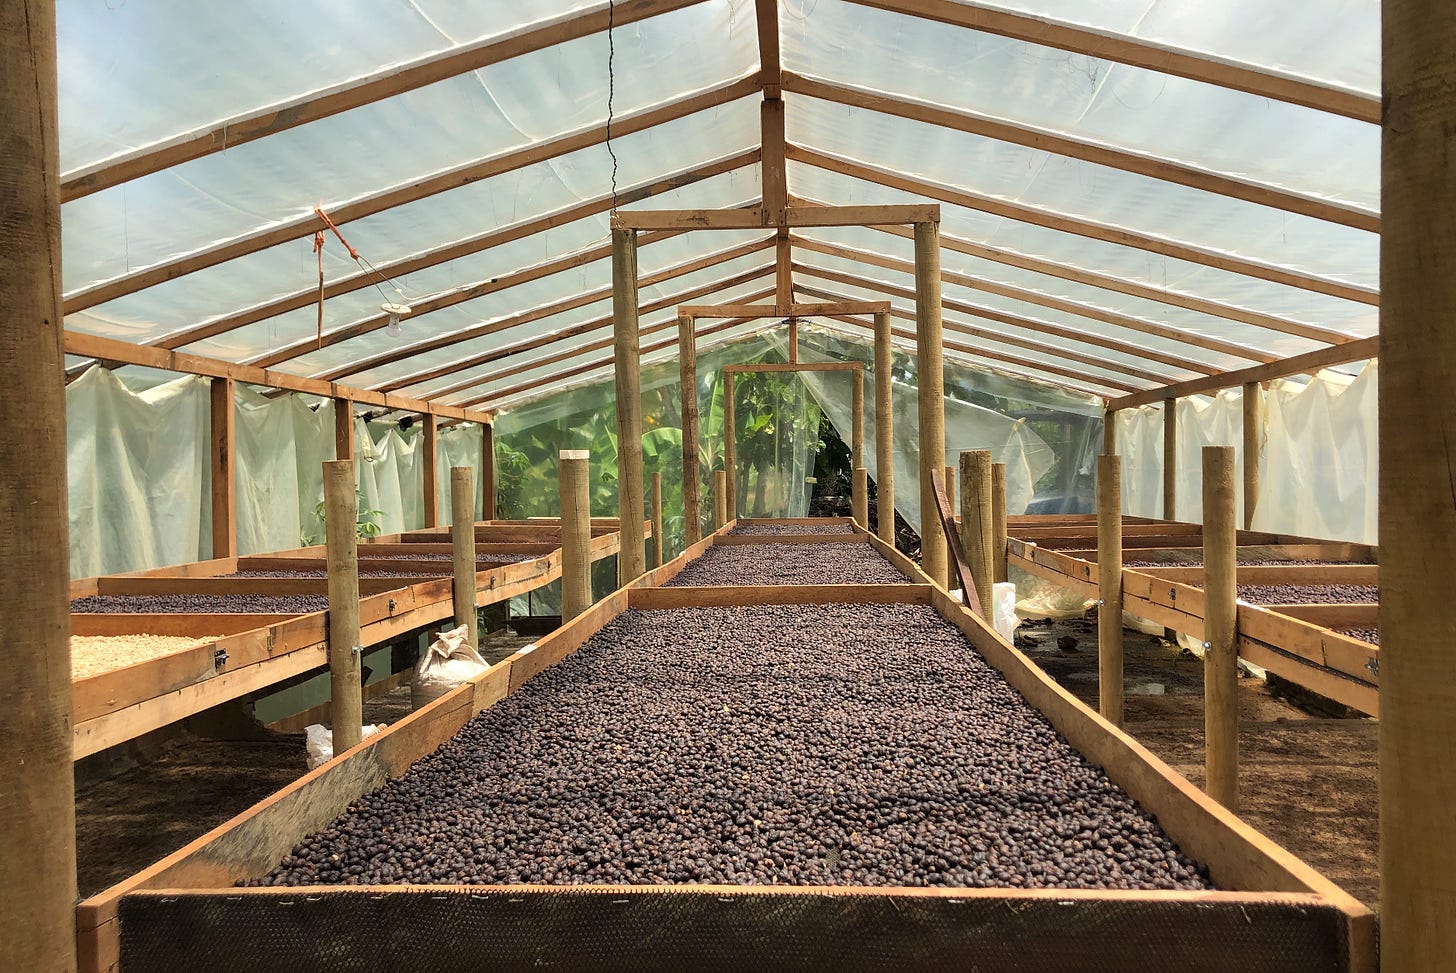 A long view of coffee cherries on raised beds under a greenhouse-style plastic roof.